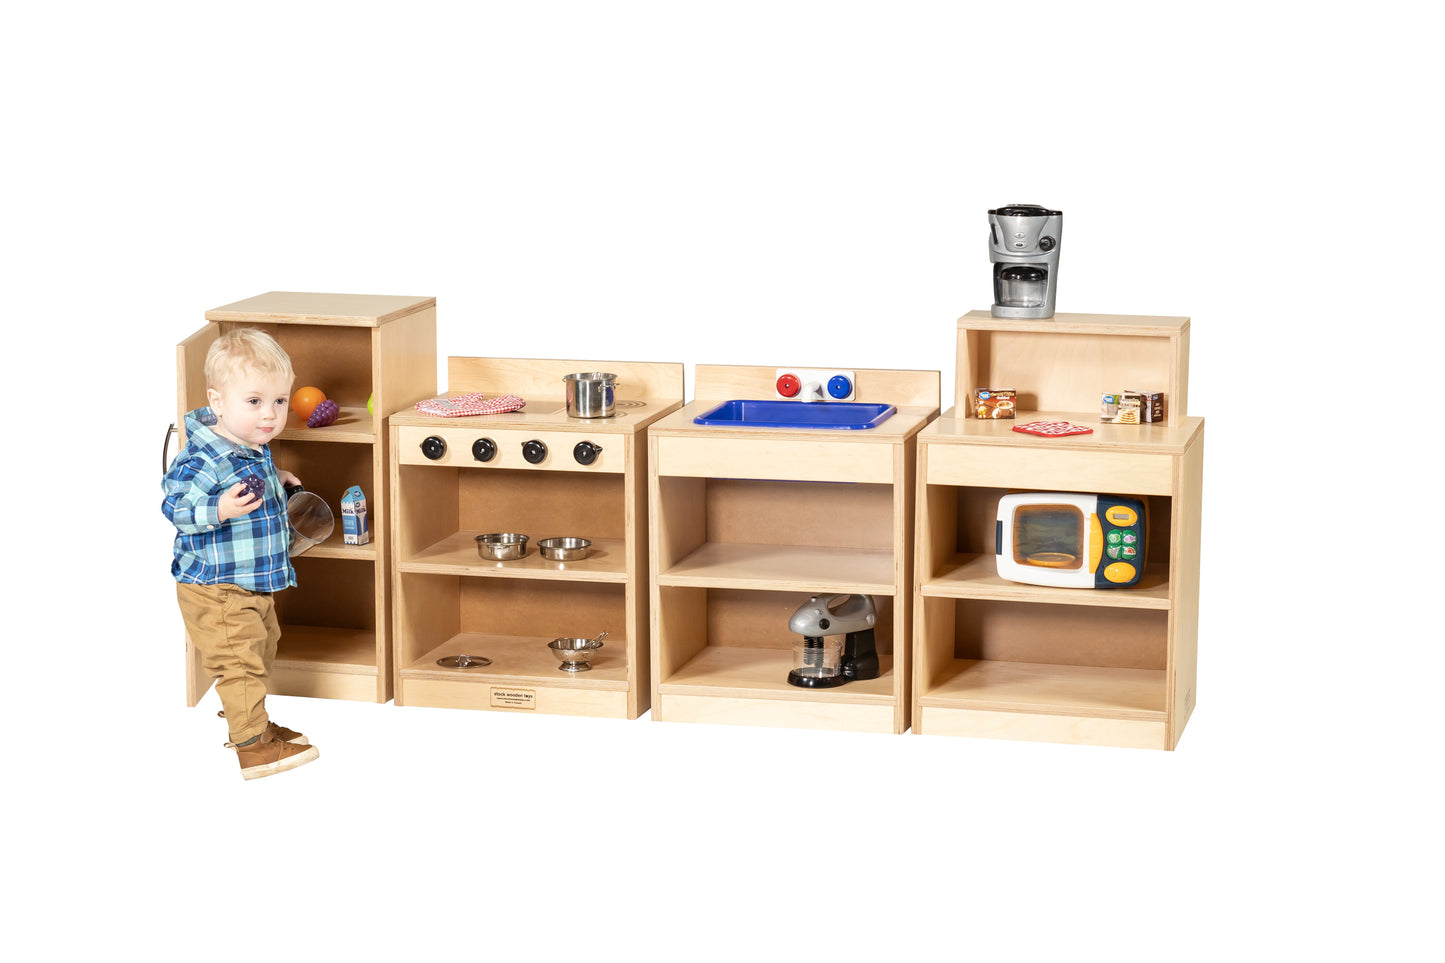 Toddler Height Kitchen Set  - Made in Canada